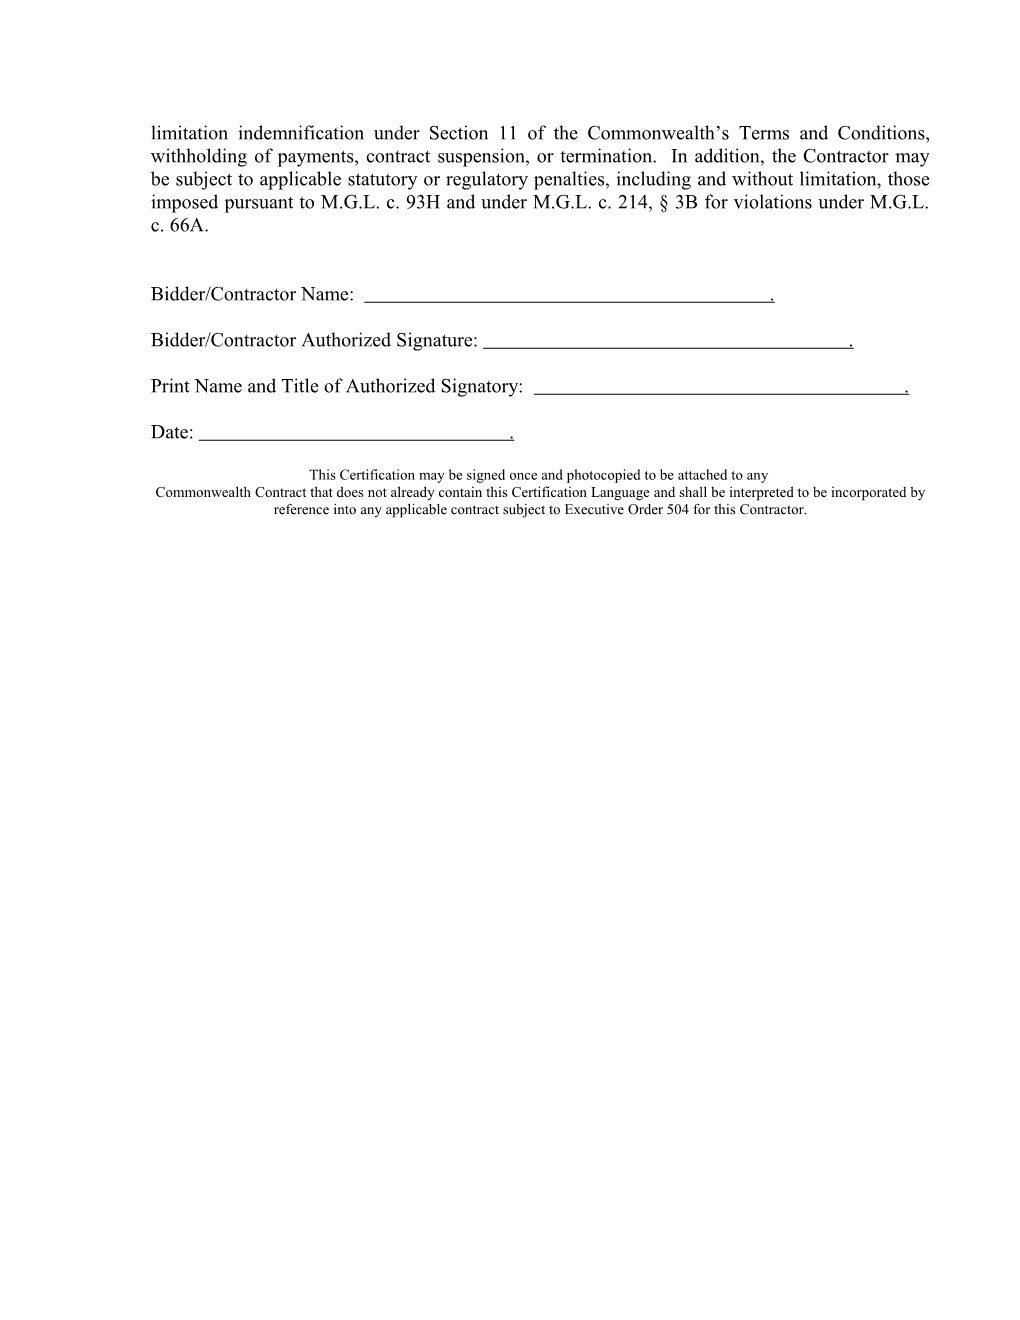 Executive Order 504 Contractor Certification Form